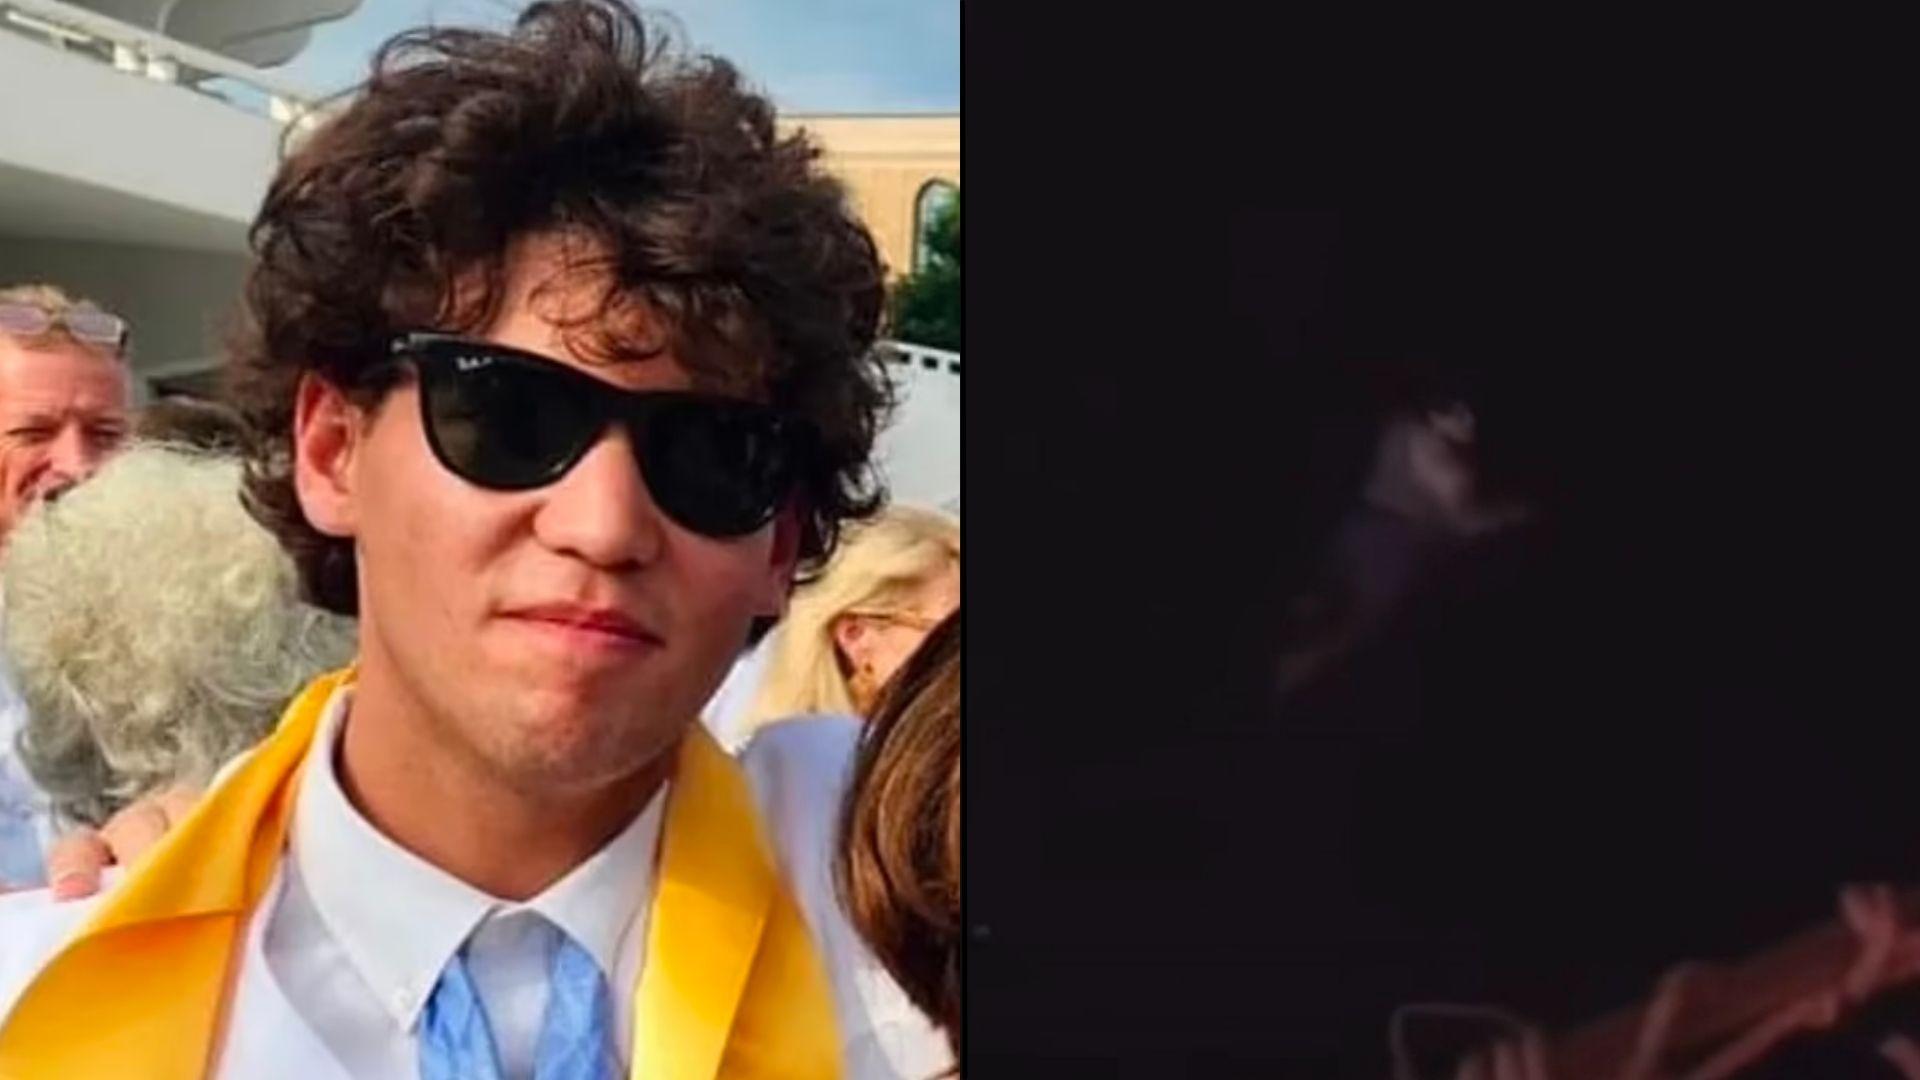 Cameron Robbins in graudation attire side-by-side with video of man in water